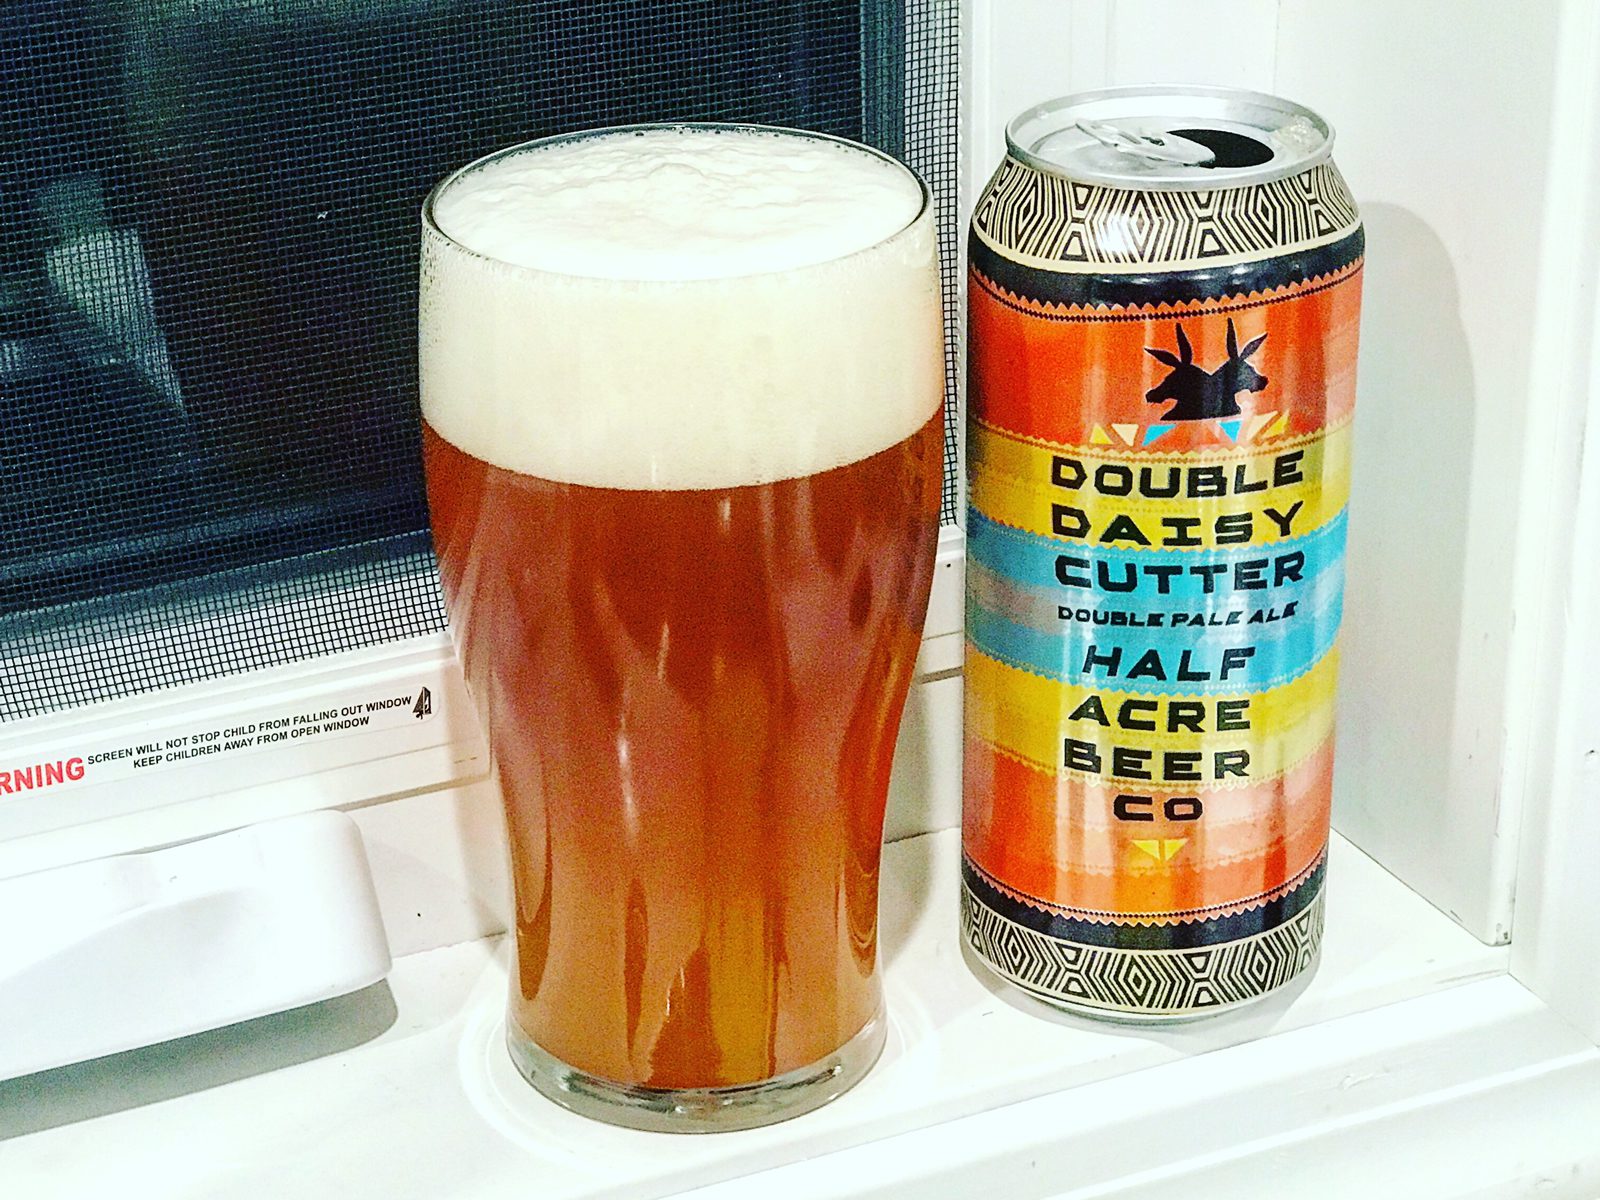 Half Acre Beer Company: Double Daisy Cutter